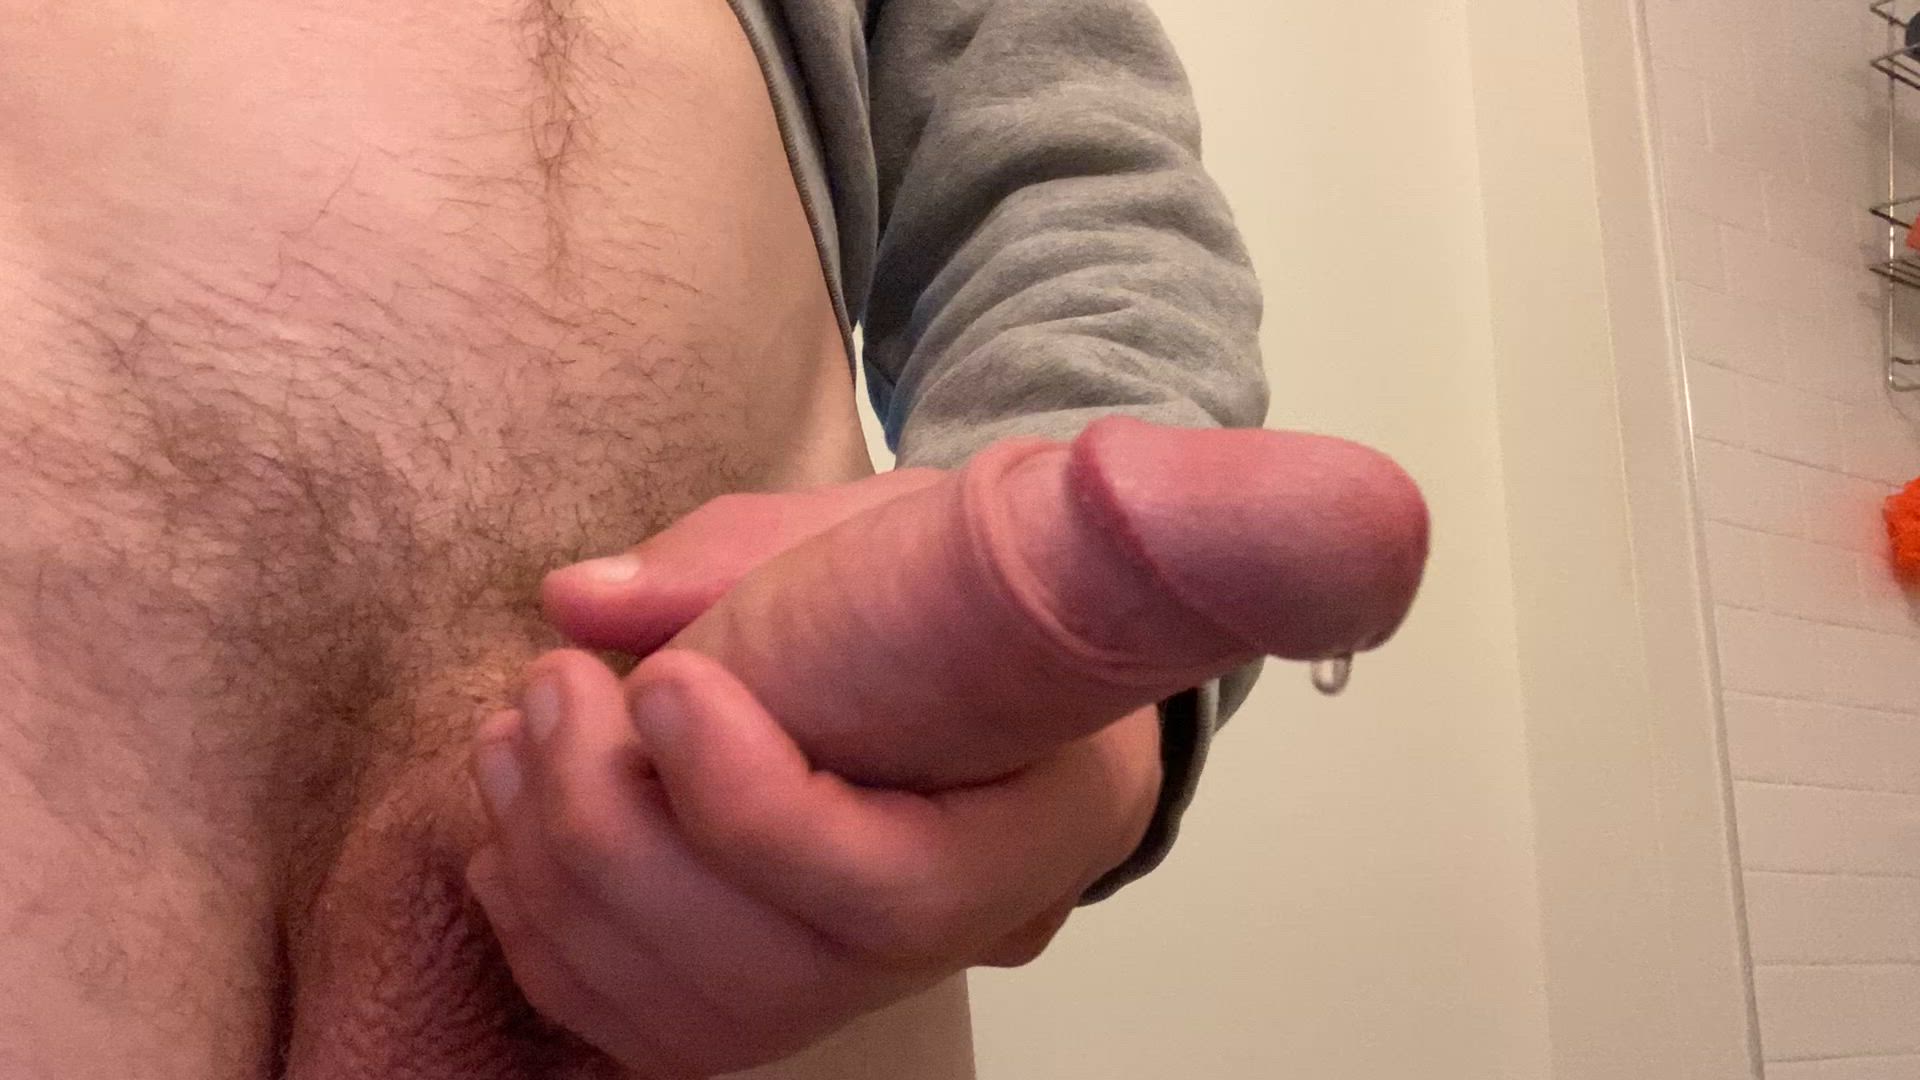 Amateur porn video with onlyfans model kingneptuneee <strong>@kingneptuneee</strong>